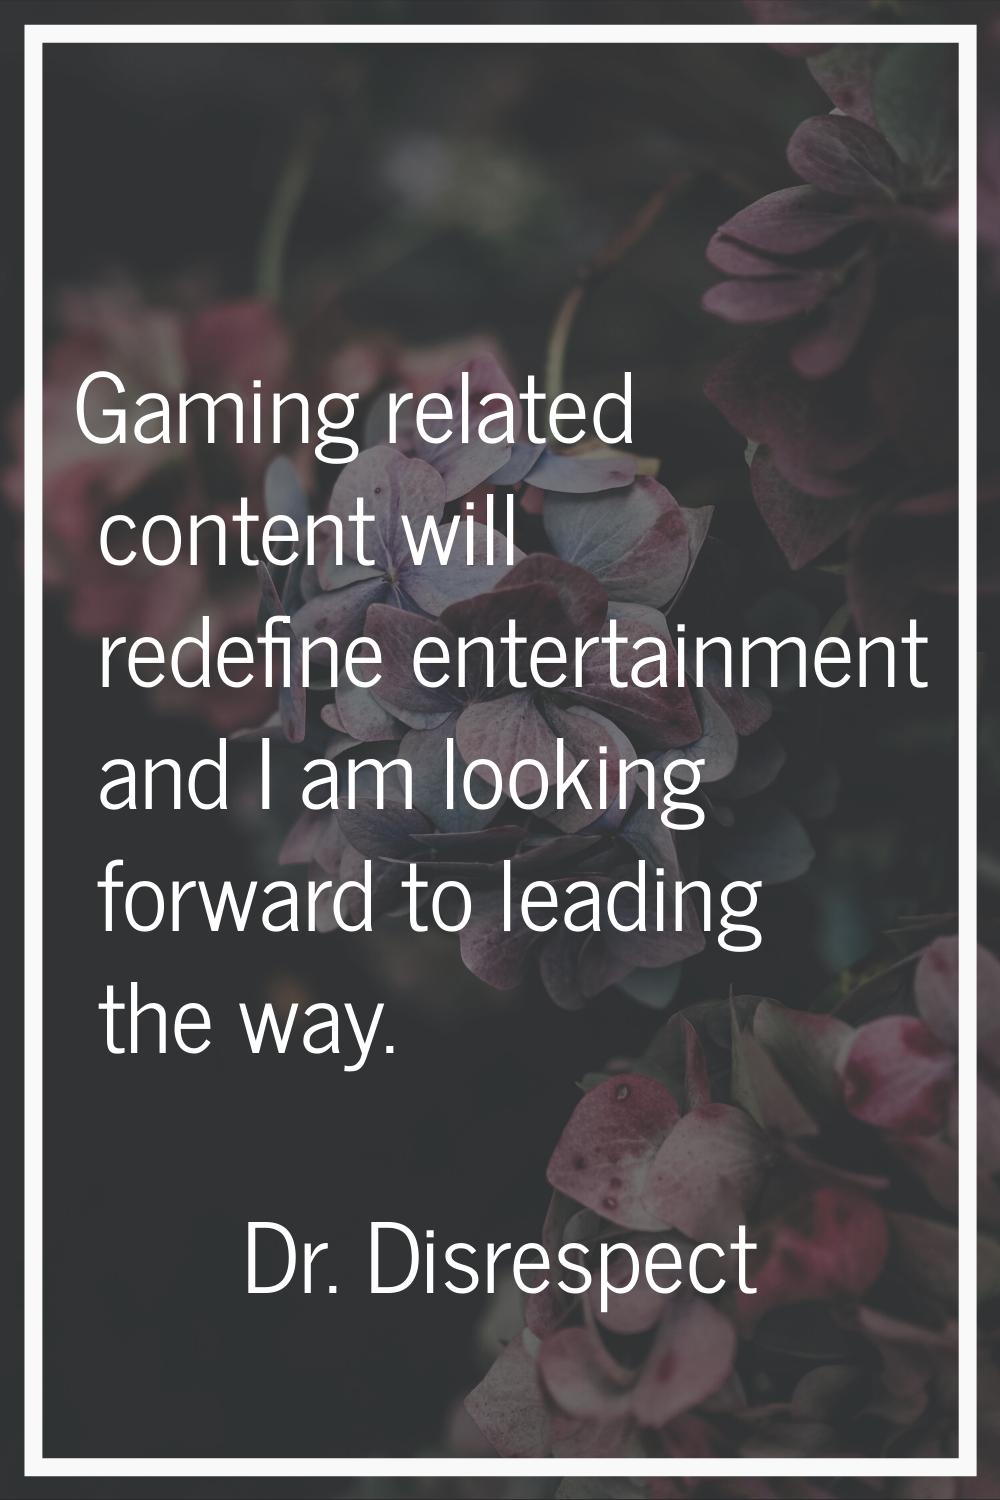 Gaming related content will redefine entertainment and I am looking forward to leading the way.